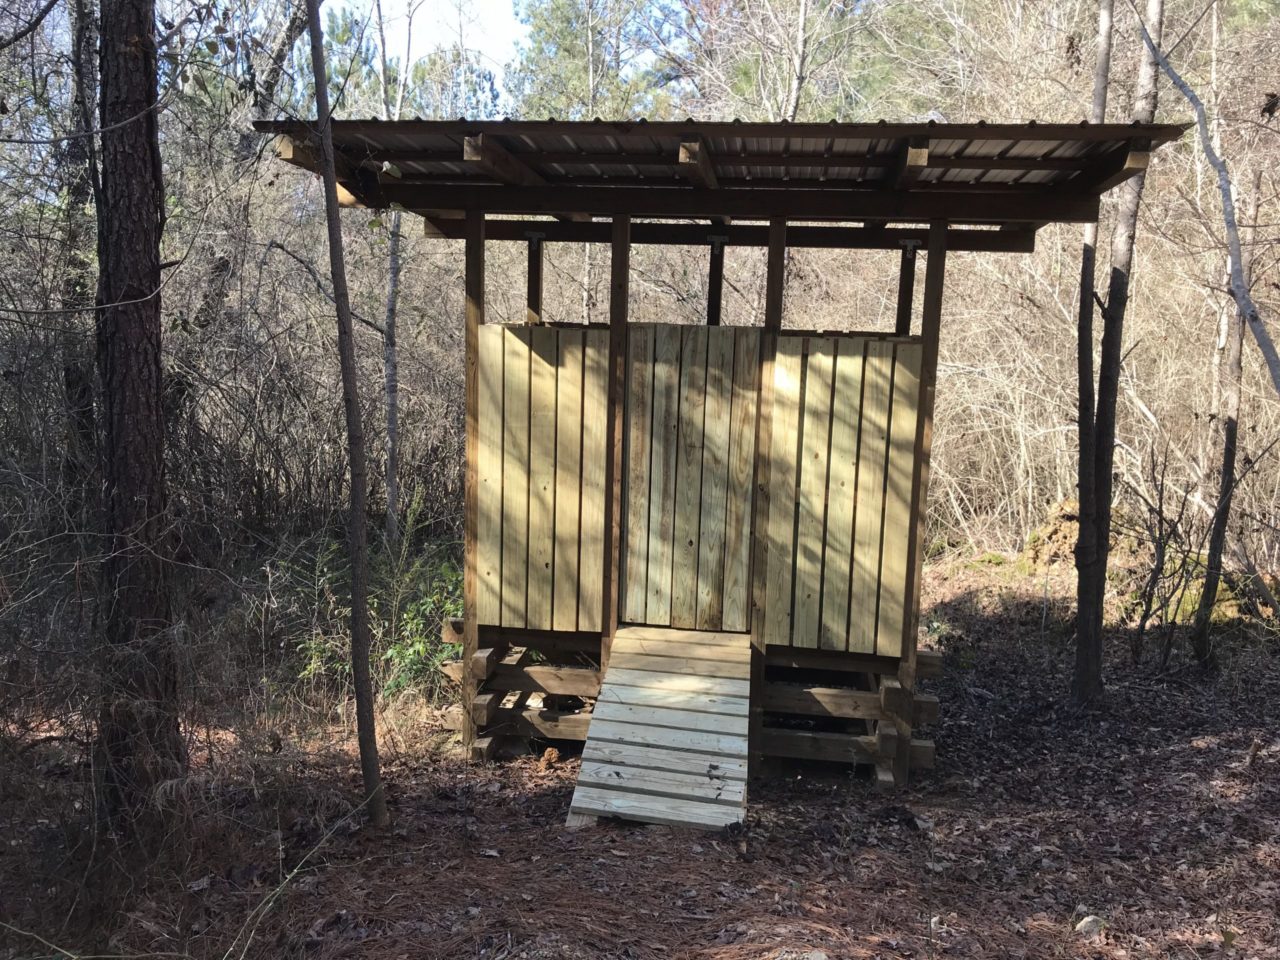 Wild Trails Builds Composting Toilets on Chattanooga's Trails